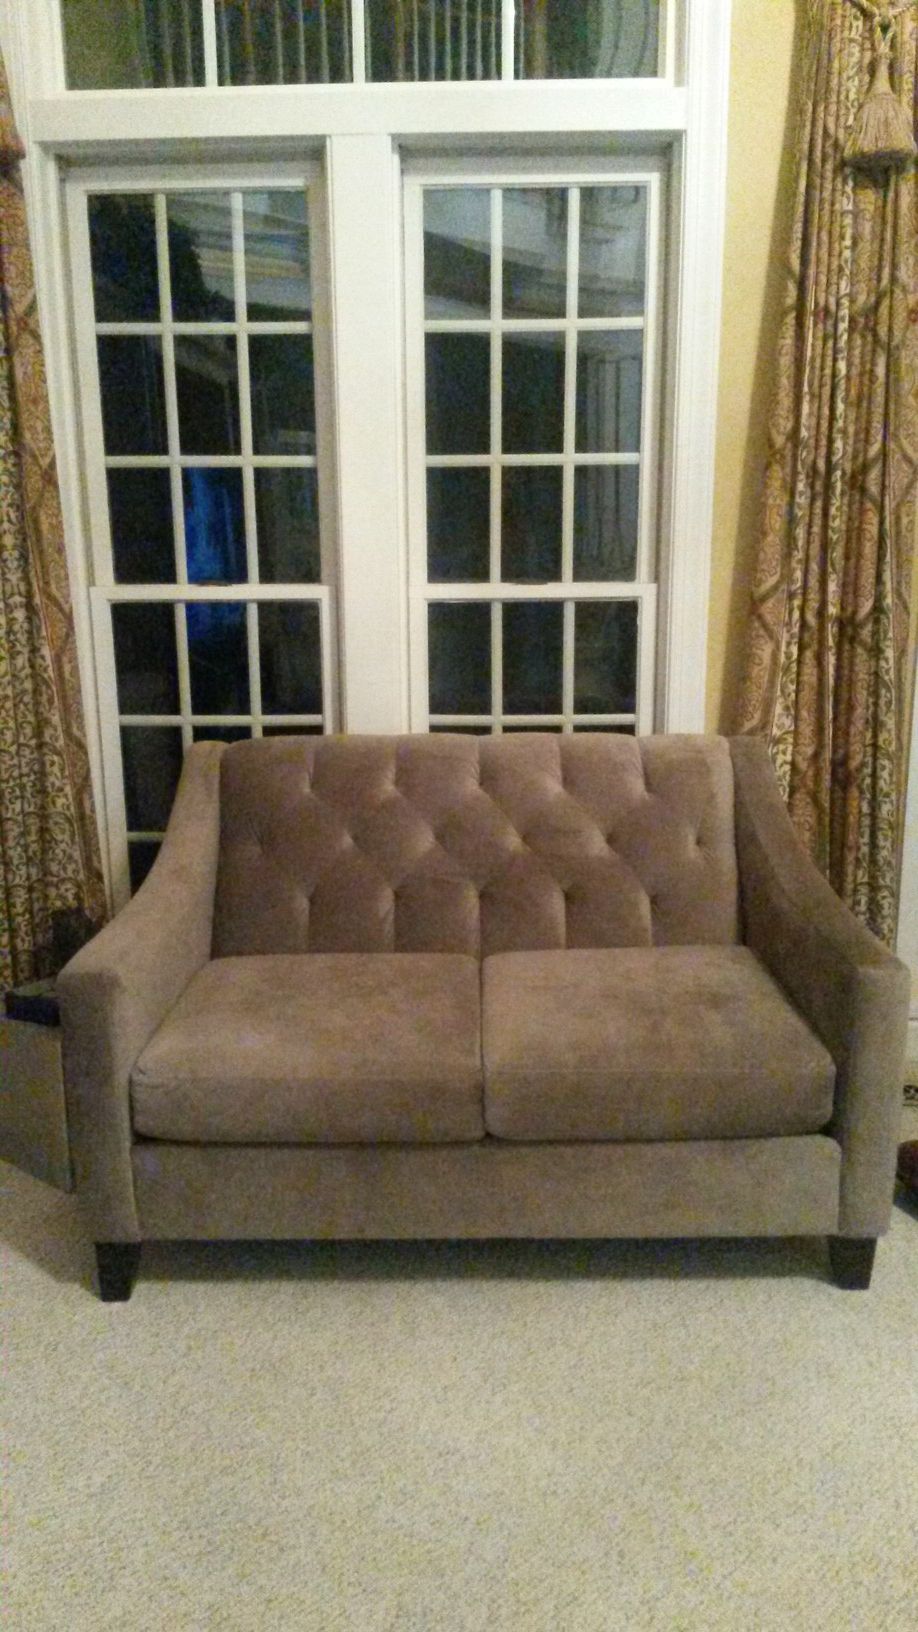 NEW Gorgeous solid grey couch